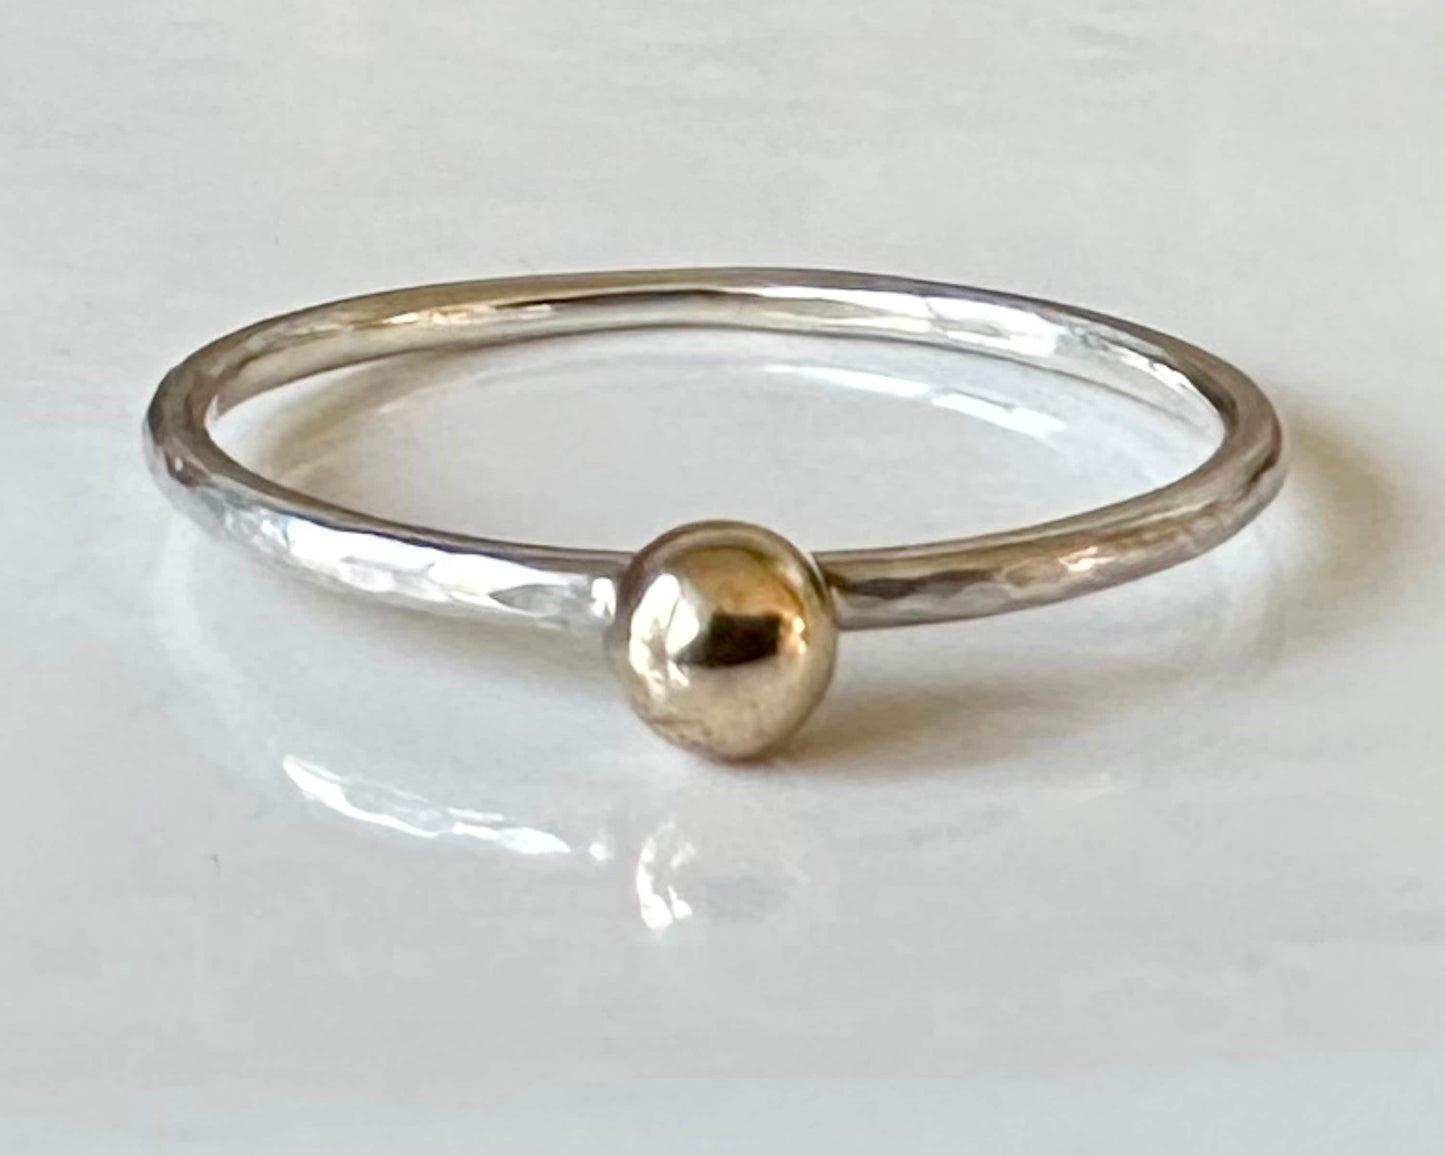 Gold Nugget on 1.2mm 925 Sterling Silver Ring, Hammered Ring Band, Recycled Gold Skinny Stacking Ring.